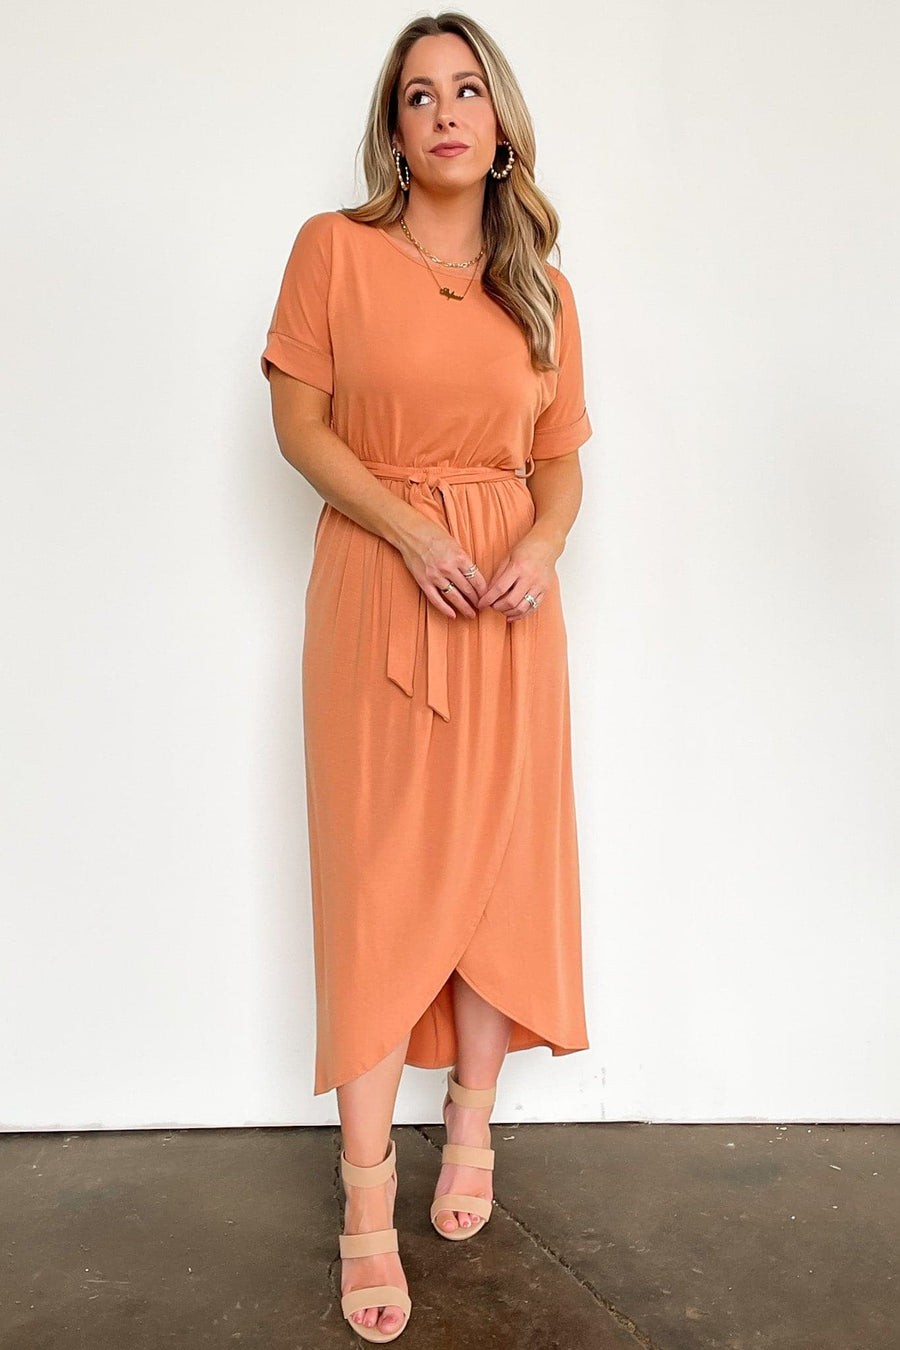 Butter Orange / S Thinking Ahead Belted Tulip Dress - Madison and Mallory